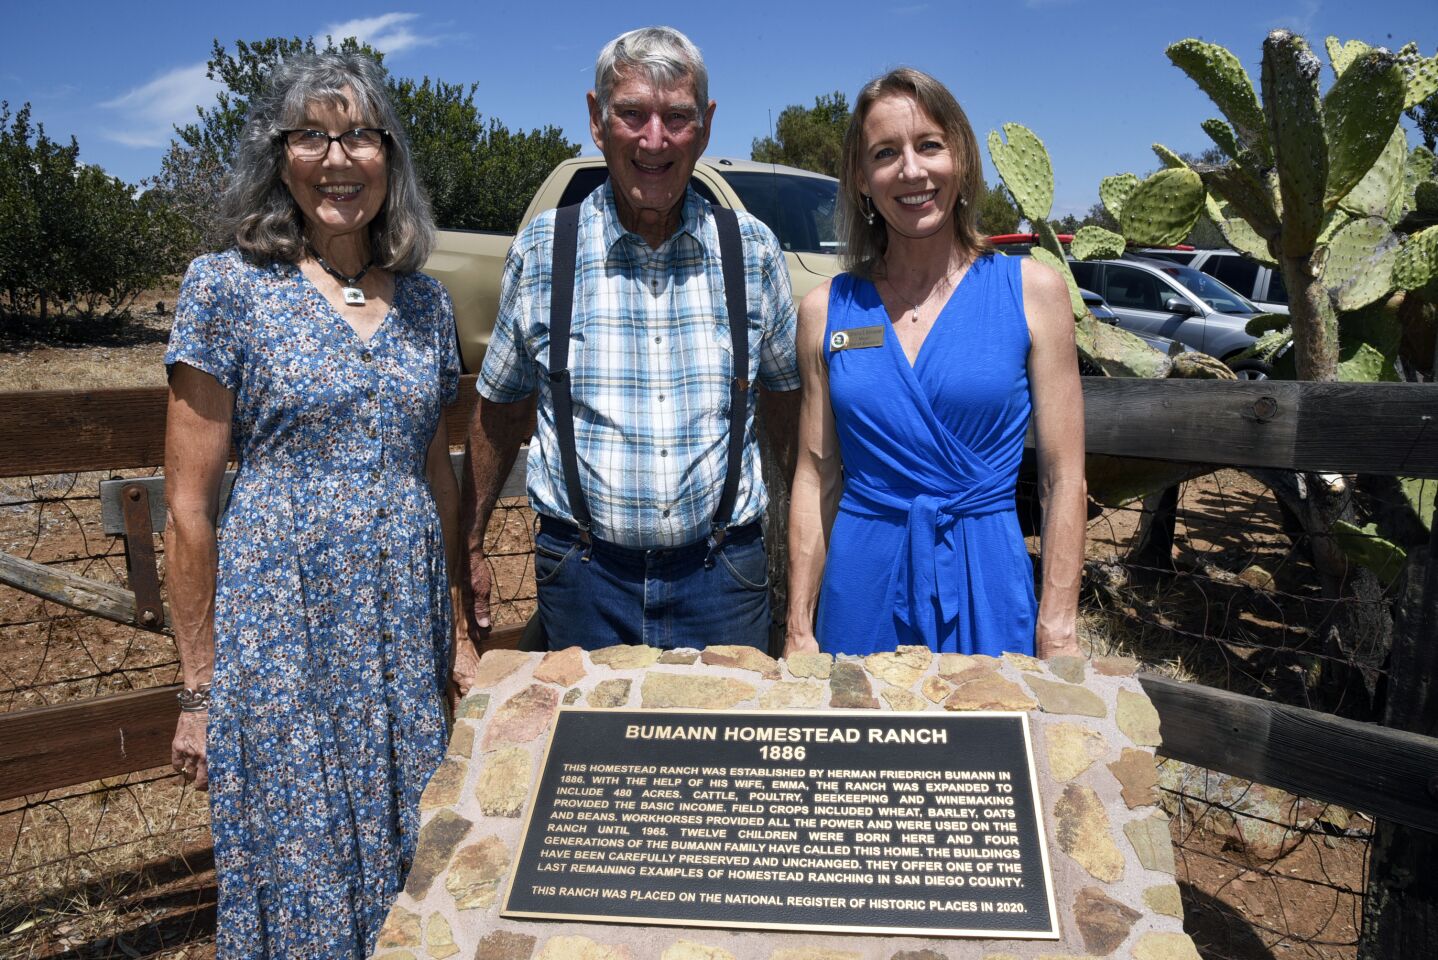 Twink and Richard Bumann are joined by Encinitas Mayor Catherine Blakespear at the National Register of Historic Places plaque